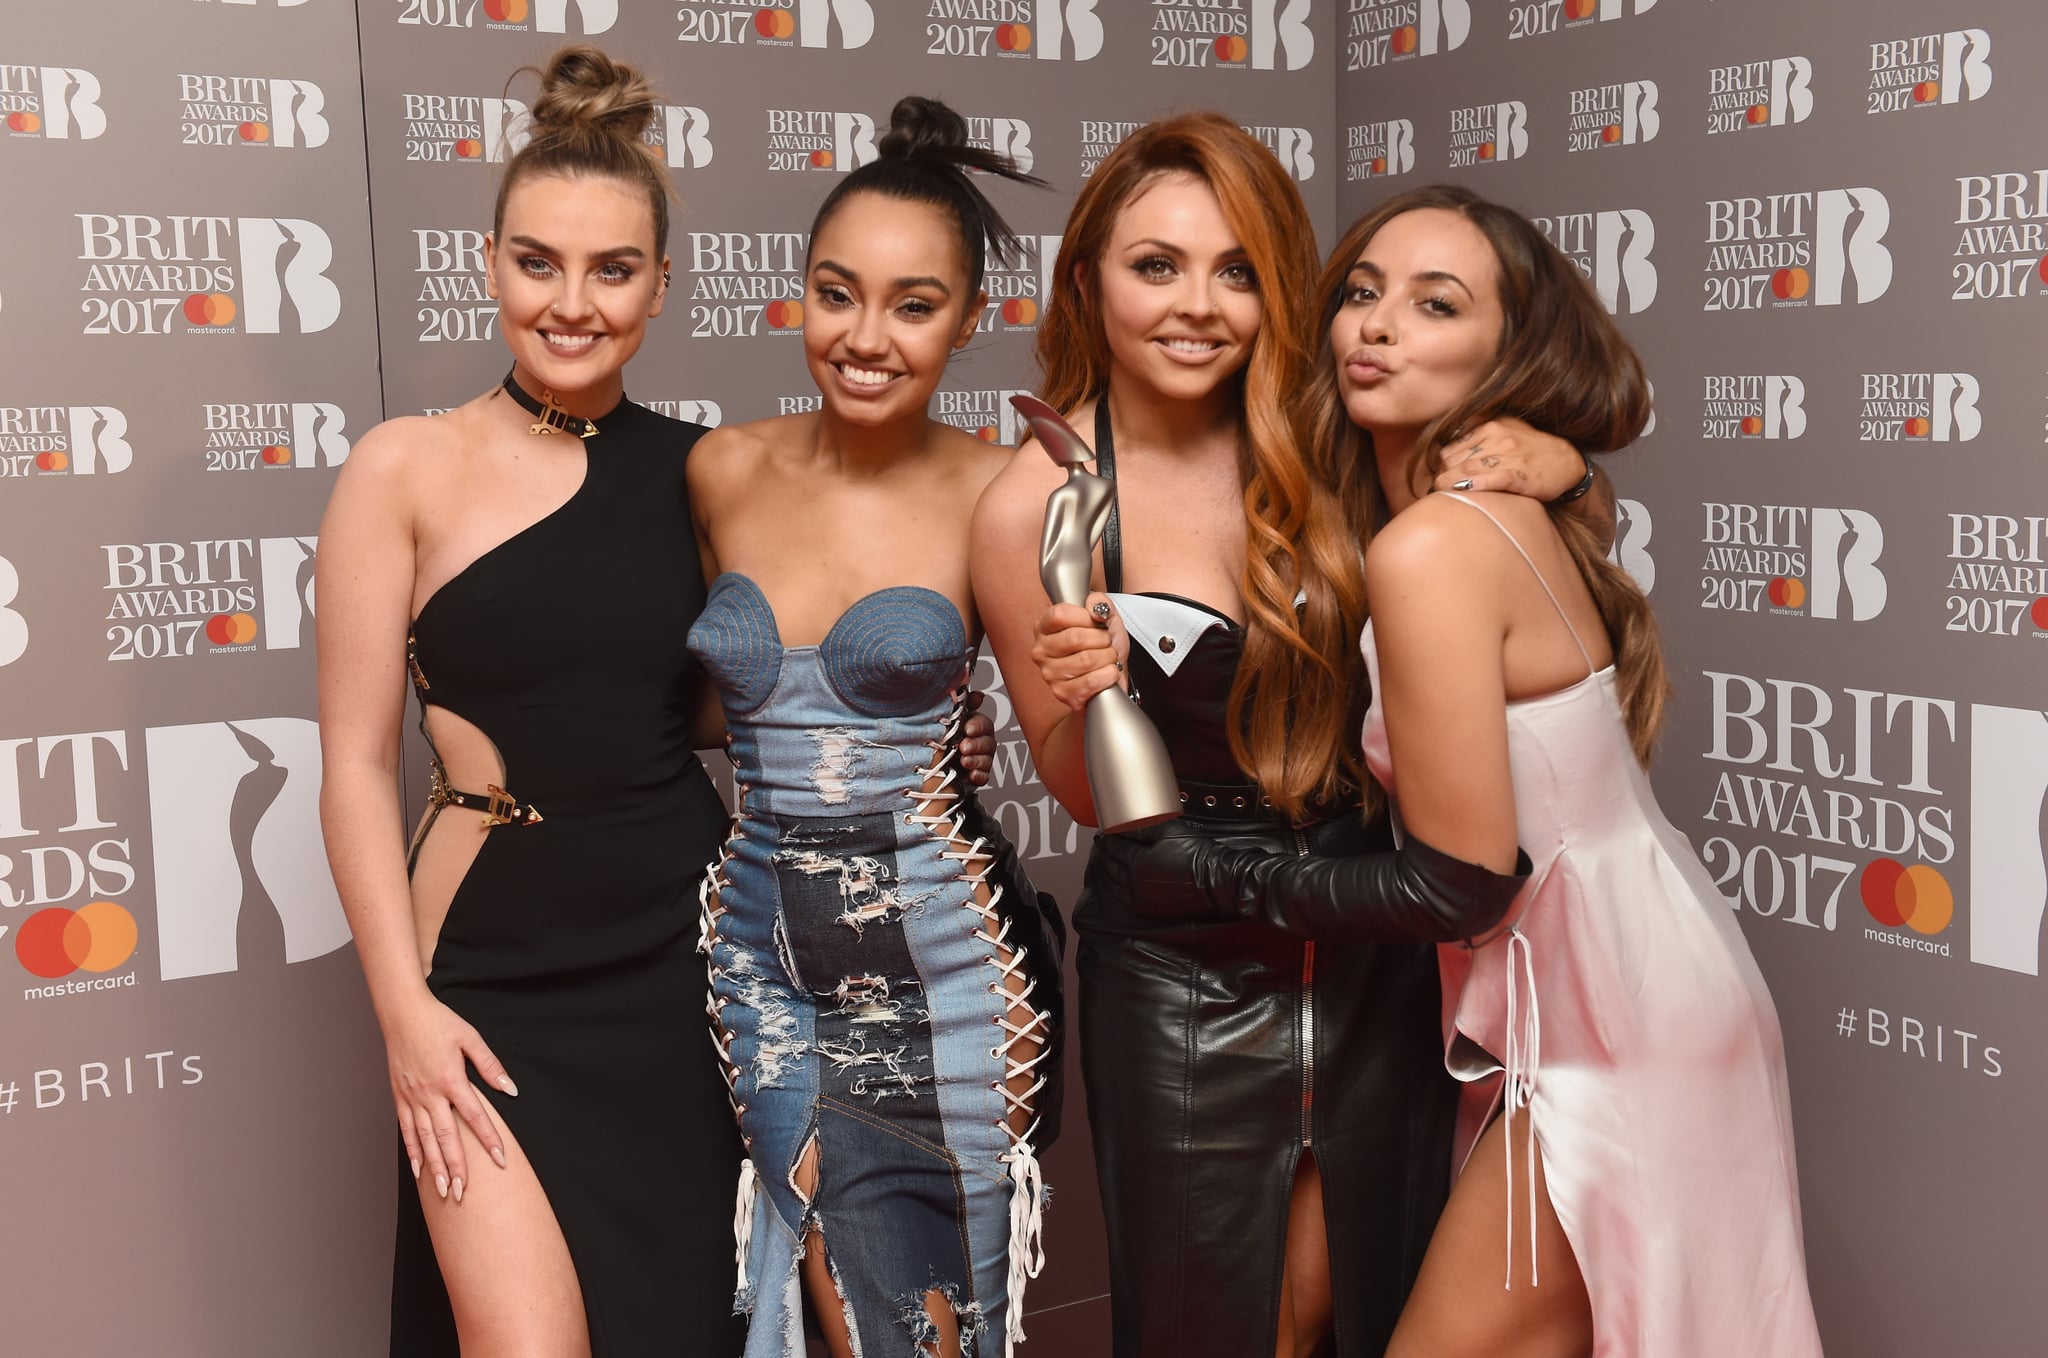 LONDON, ENGLAND - FEBRUARY 22:  (EDITORIAL USE ONLY) (L-R) Perrie Edwards, Leigh-Anne Pinnock, Jesy Nelson and Jade Thirlwall of Little Mix pose with their award for Best British Single in the winner's room at The BRIT Awards 2017 at The O2 Arena on February 22, 2017 in London, England.  (Photo by Samir Hussein/WireImage)